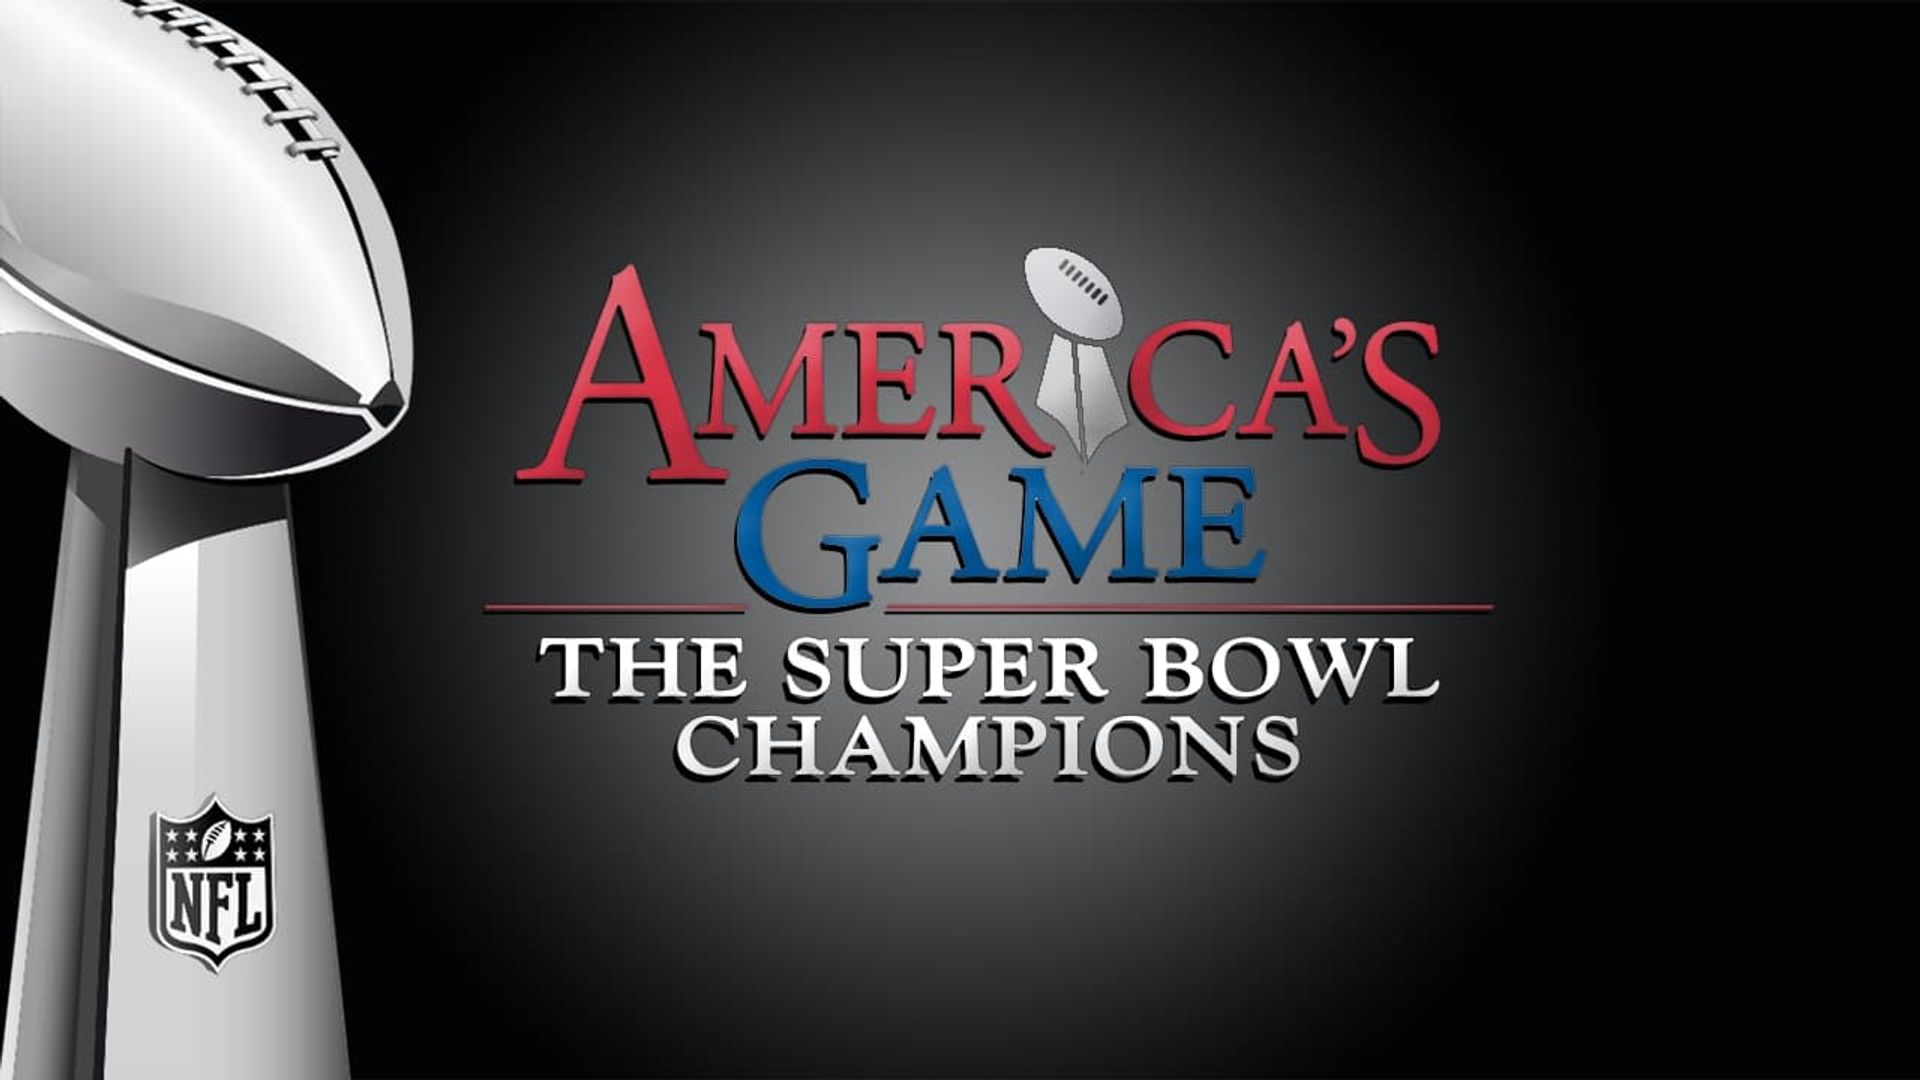 America's Game: The Super Bowl Champions background